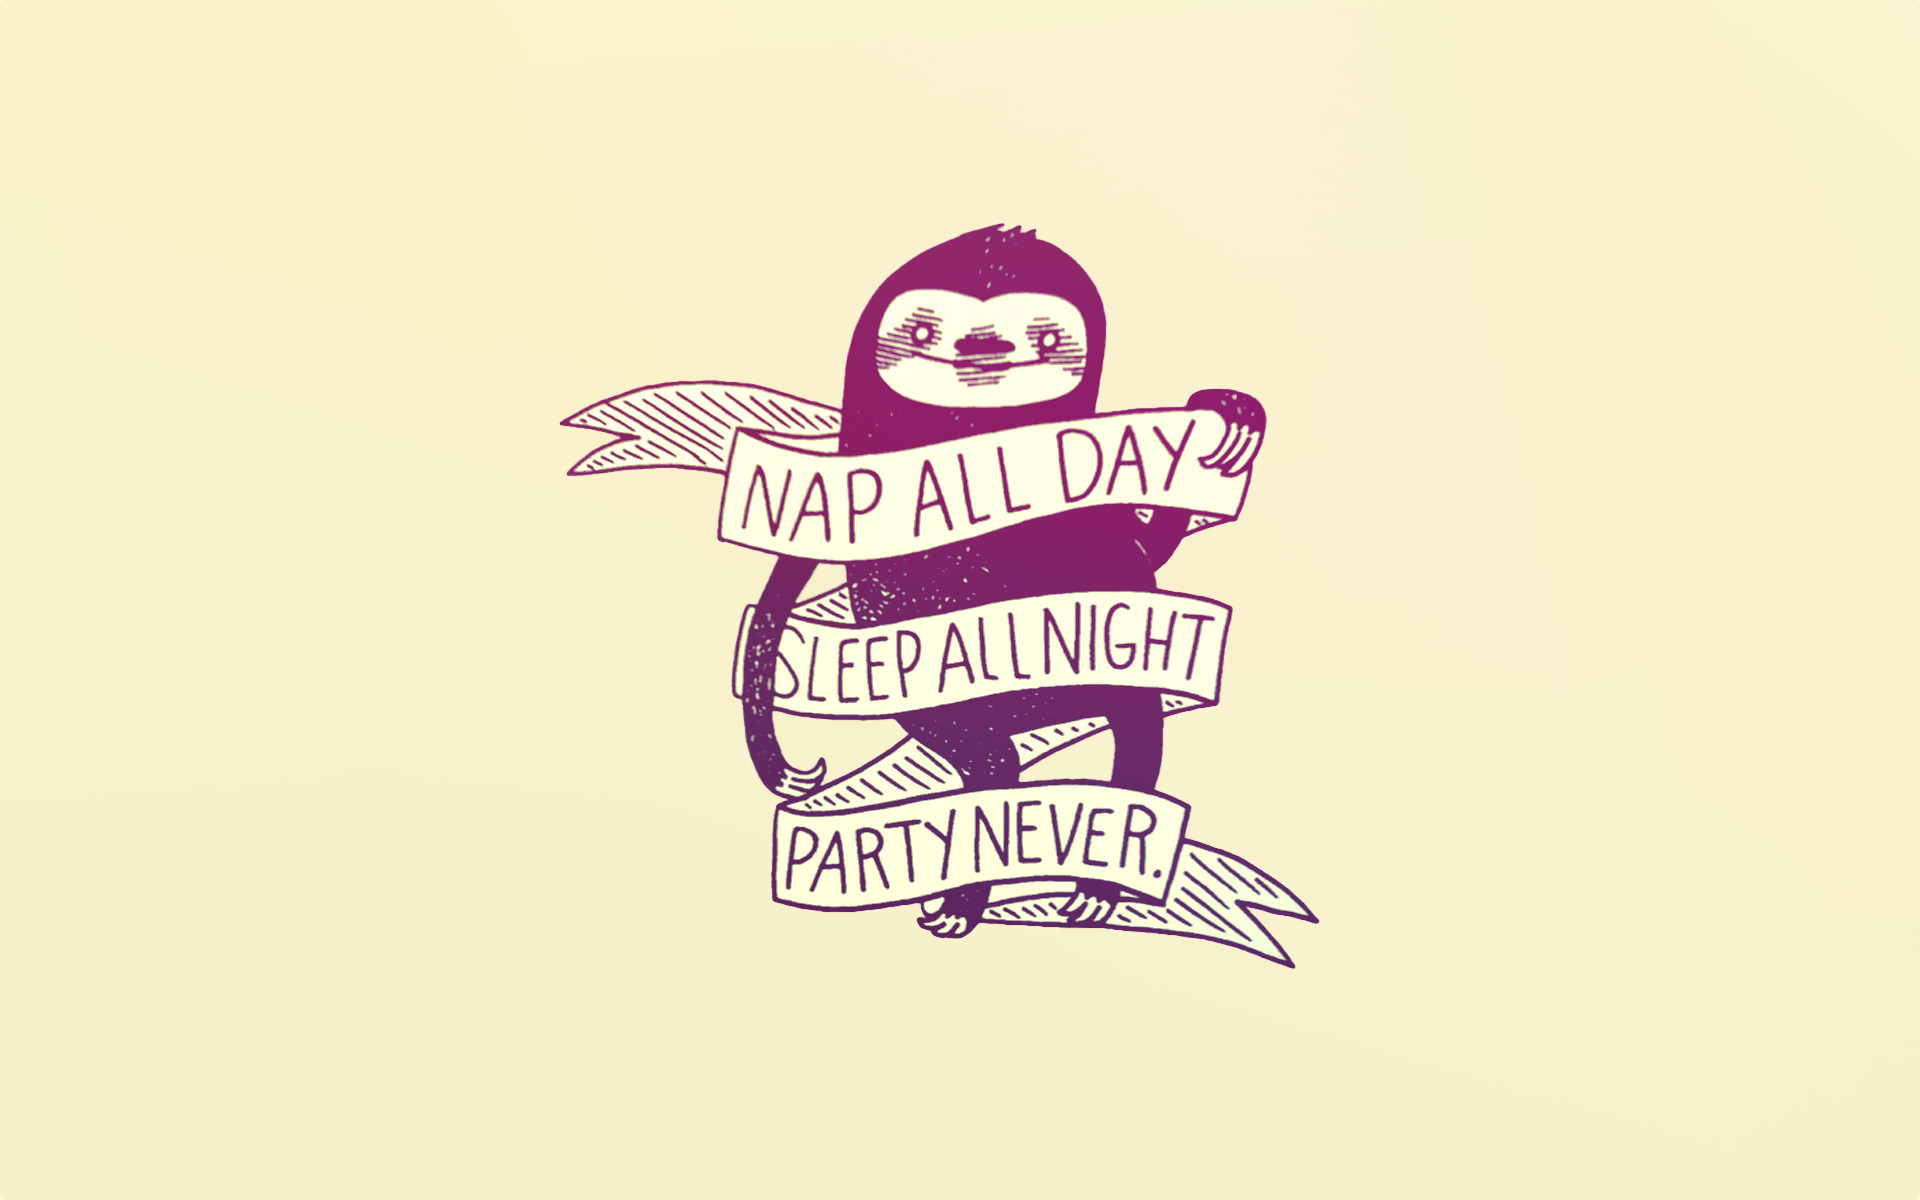 1920x1200 Made a wallpaper out of "Nap all day" sloth